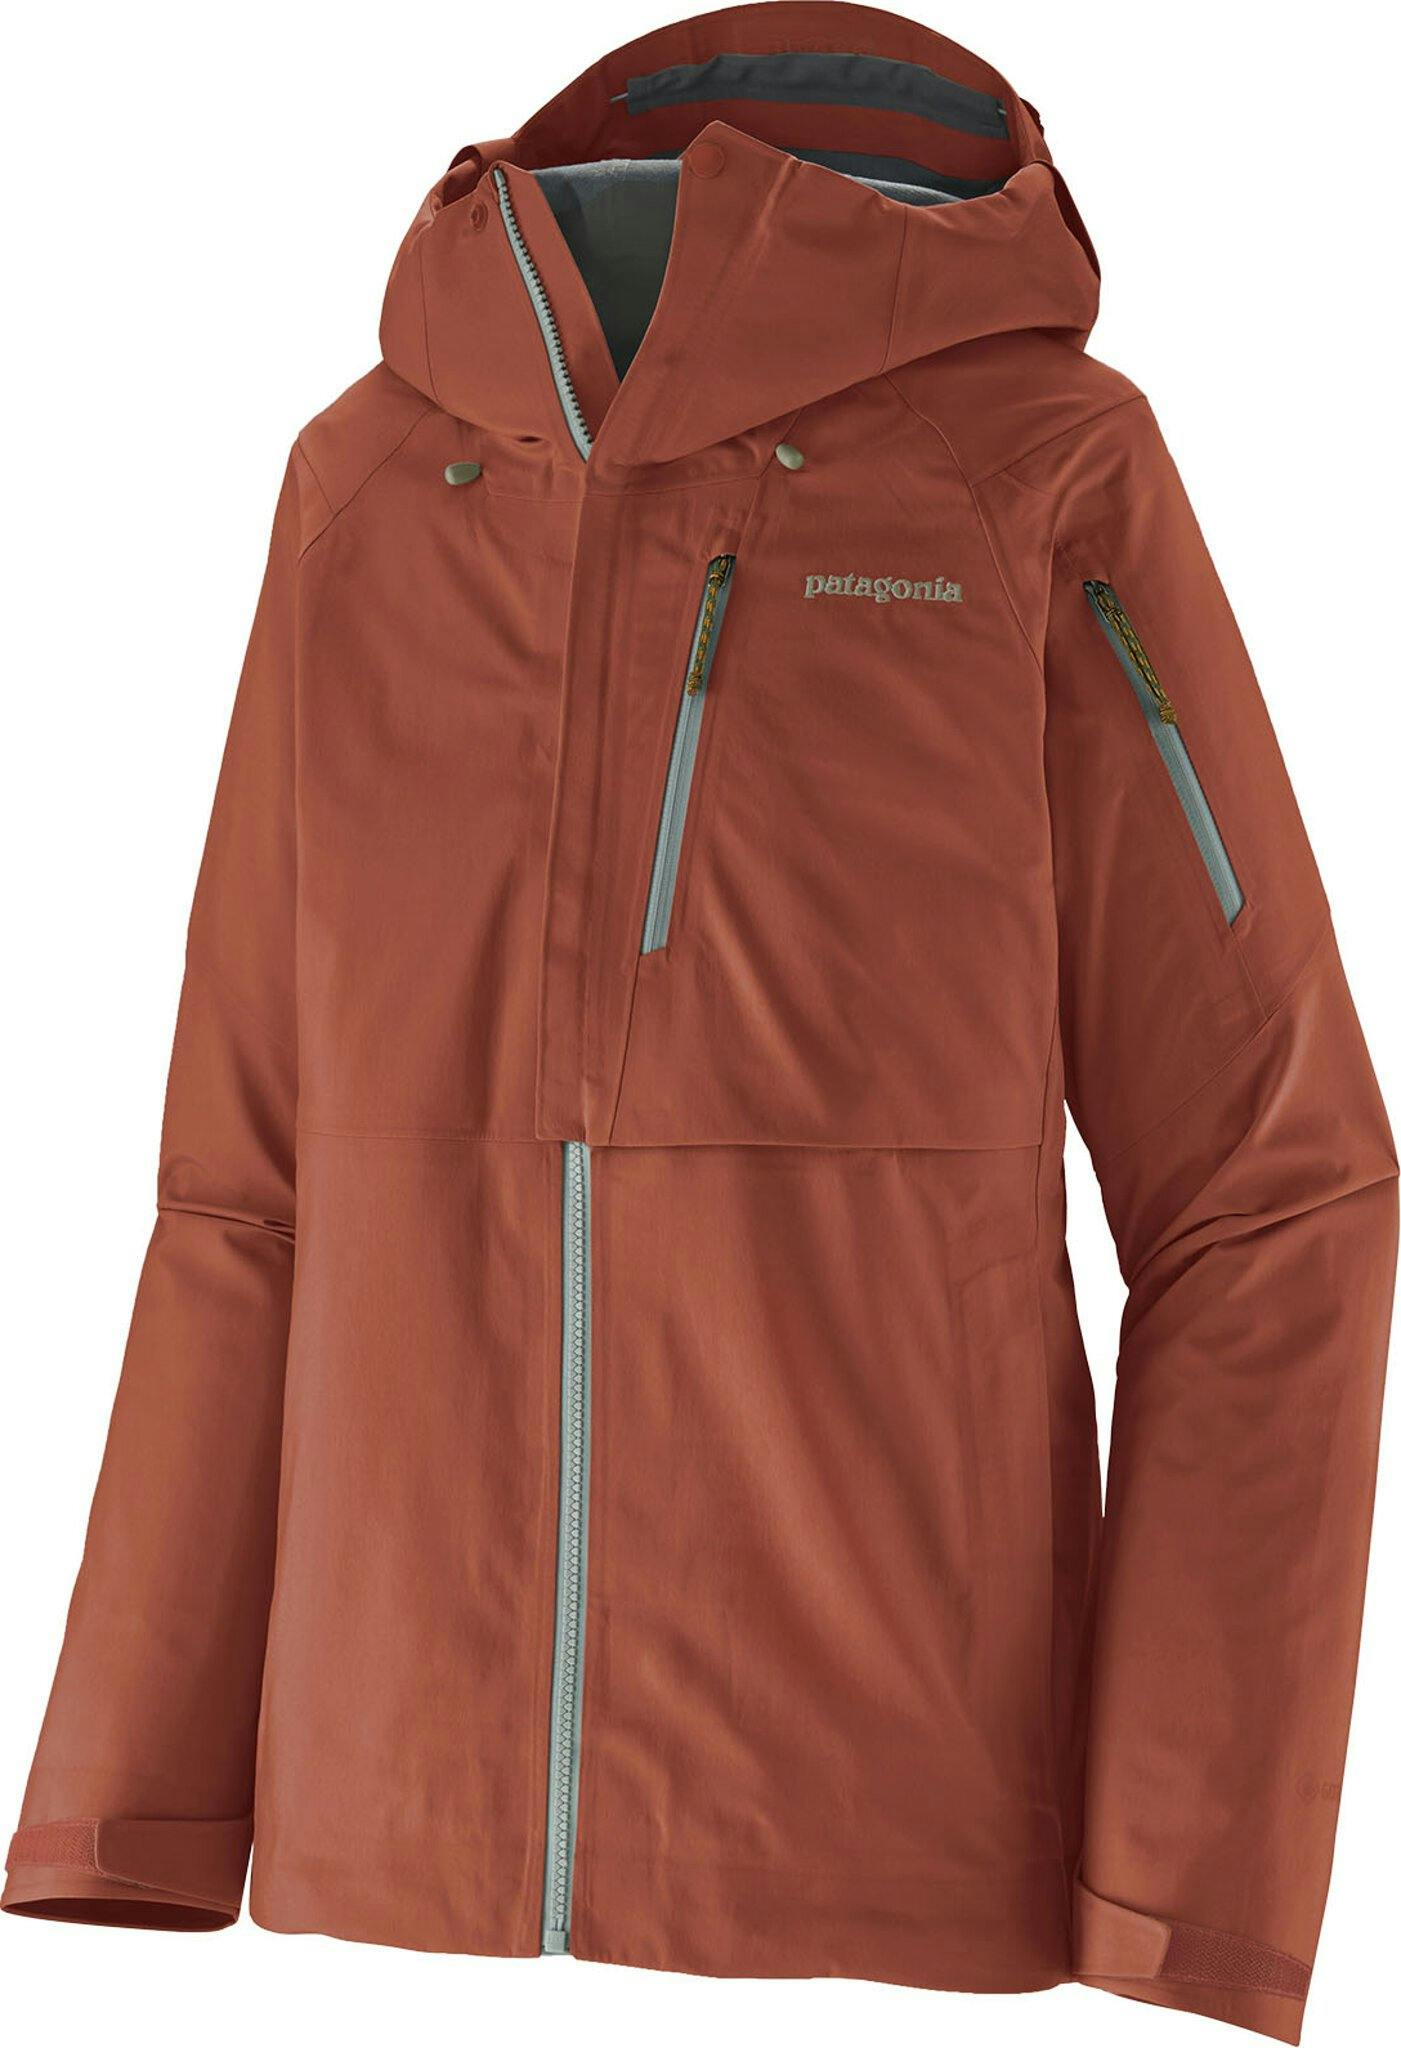 Product image for Untracked Jacket - Women's 